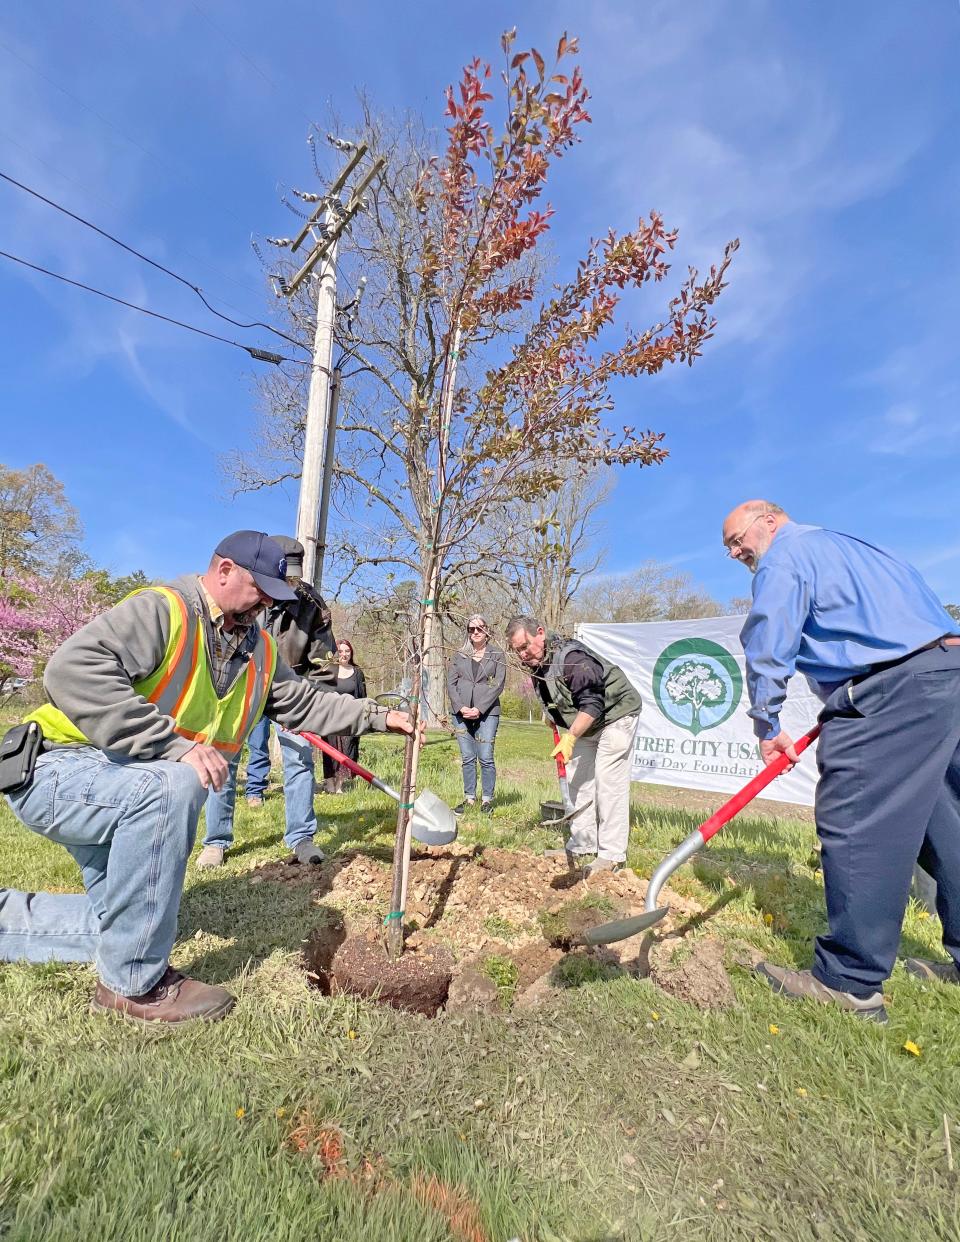 The City of Mansfield Shade Tree Commission celebrated Arbor Day on Friday by planting Newport purple leaf plum trees outside the Mansfield Art Center.